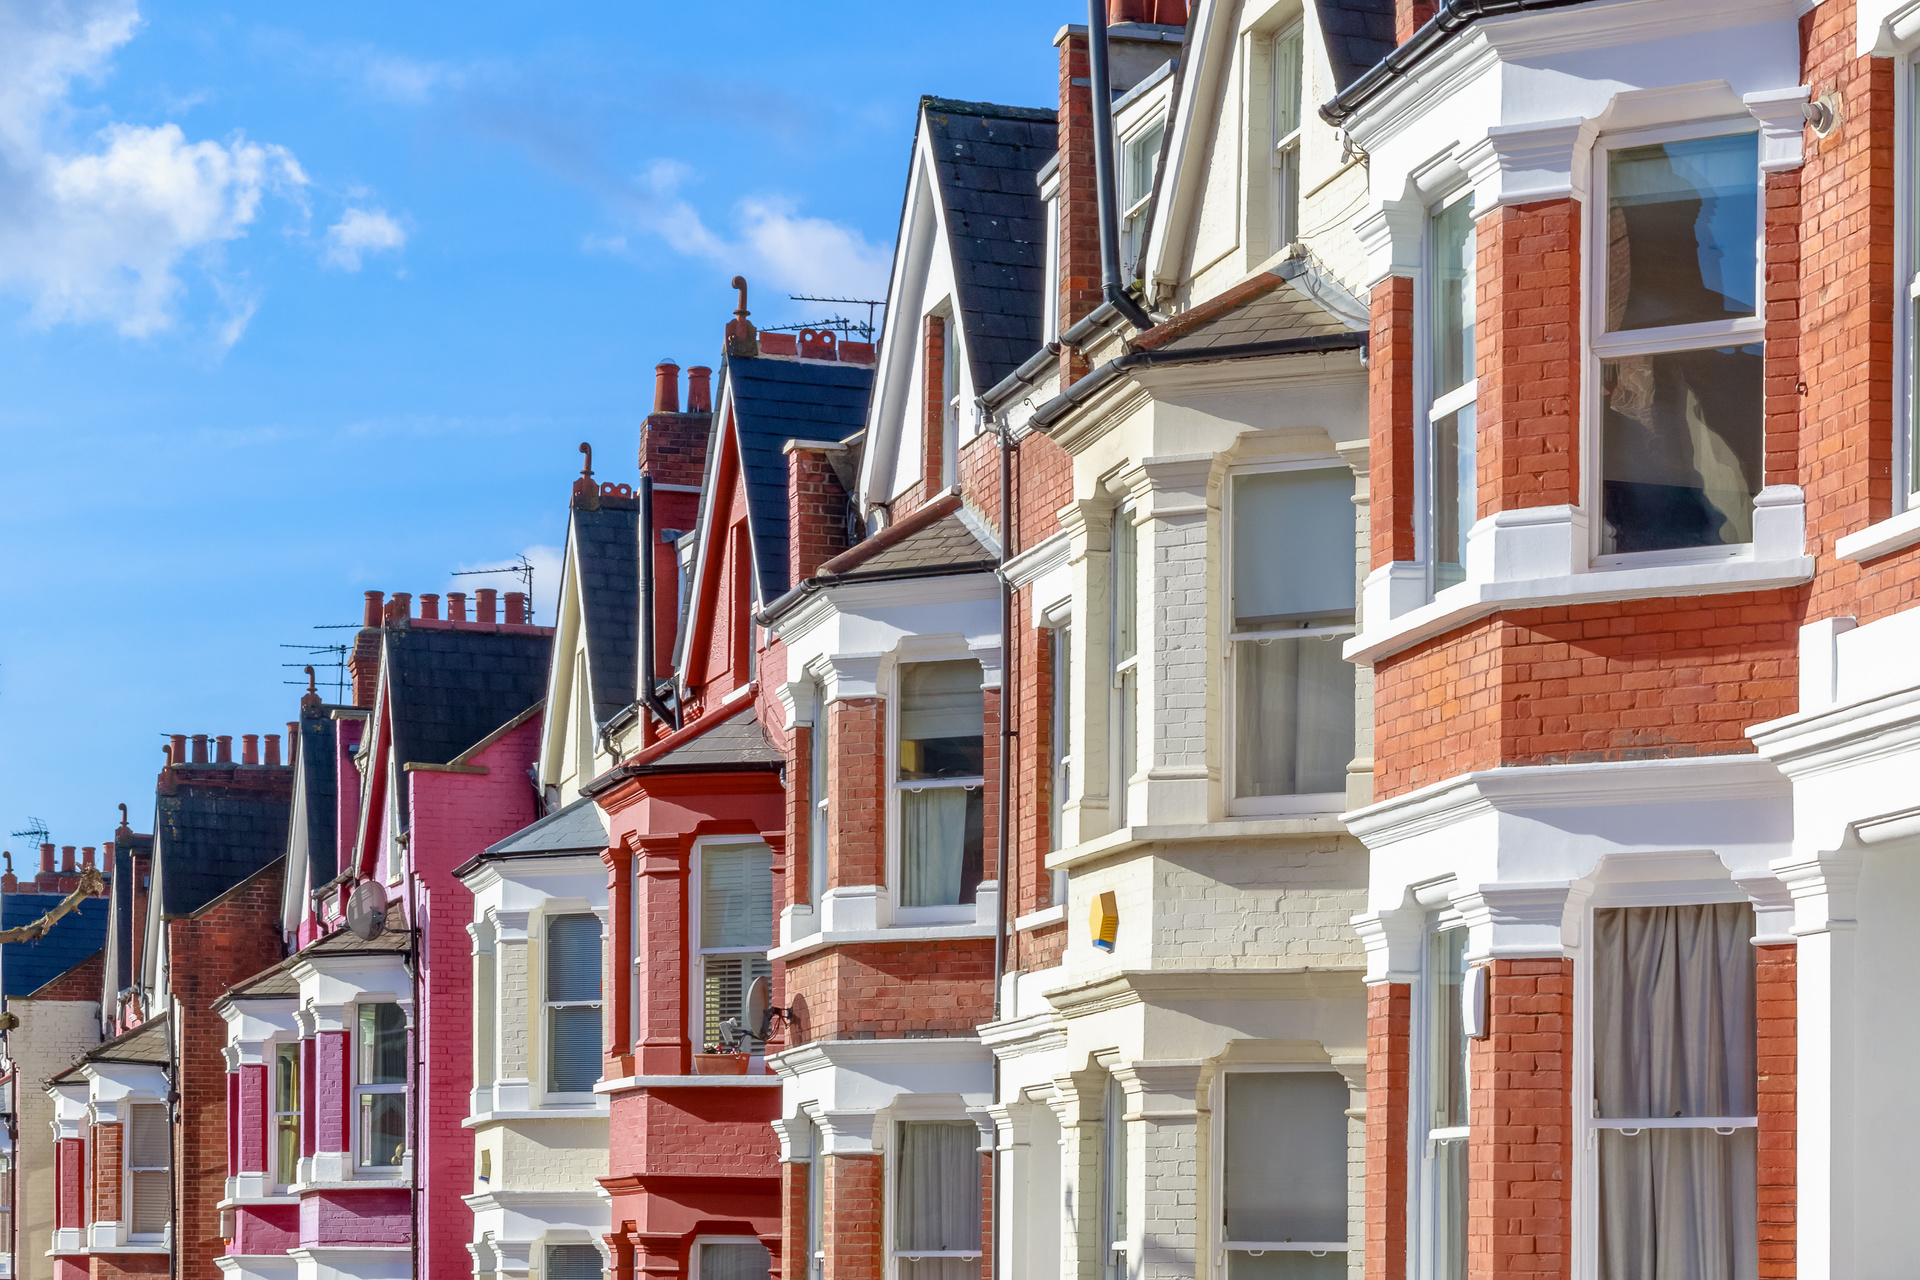 A row of terraced houses, in various bright colours; our conveyancing solicitors discuss whether it is better to use a Conveyancing Solicitor.